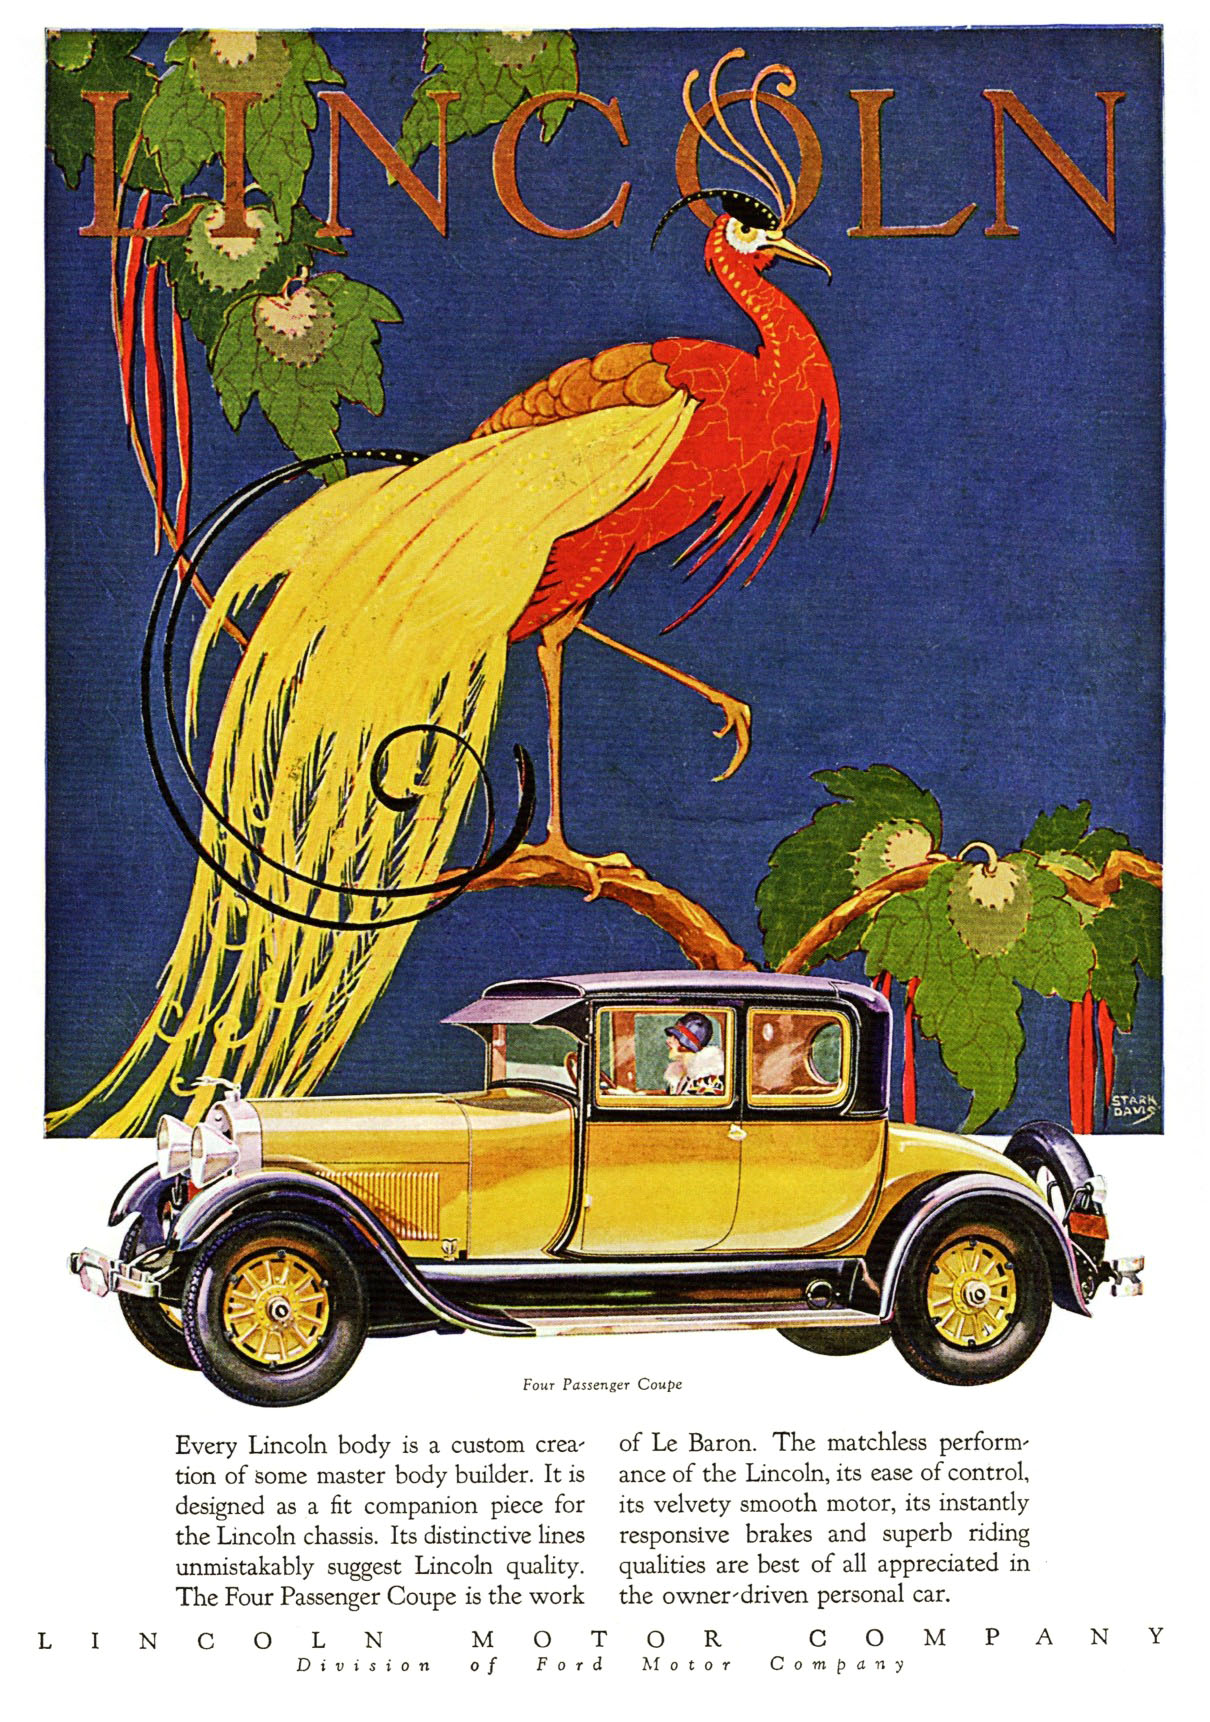 Lincoln Ad (February, 1928): Four-Passenger Coupe by Le Baron - Illustrated by Stark Davis